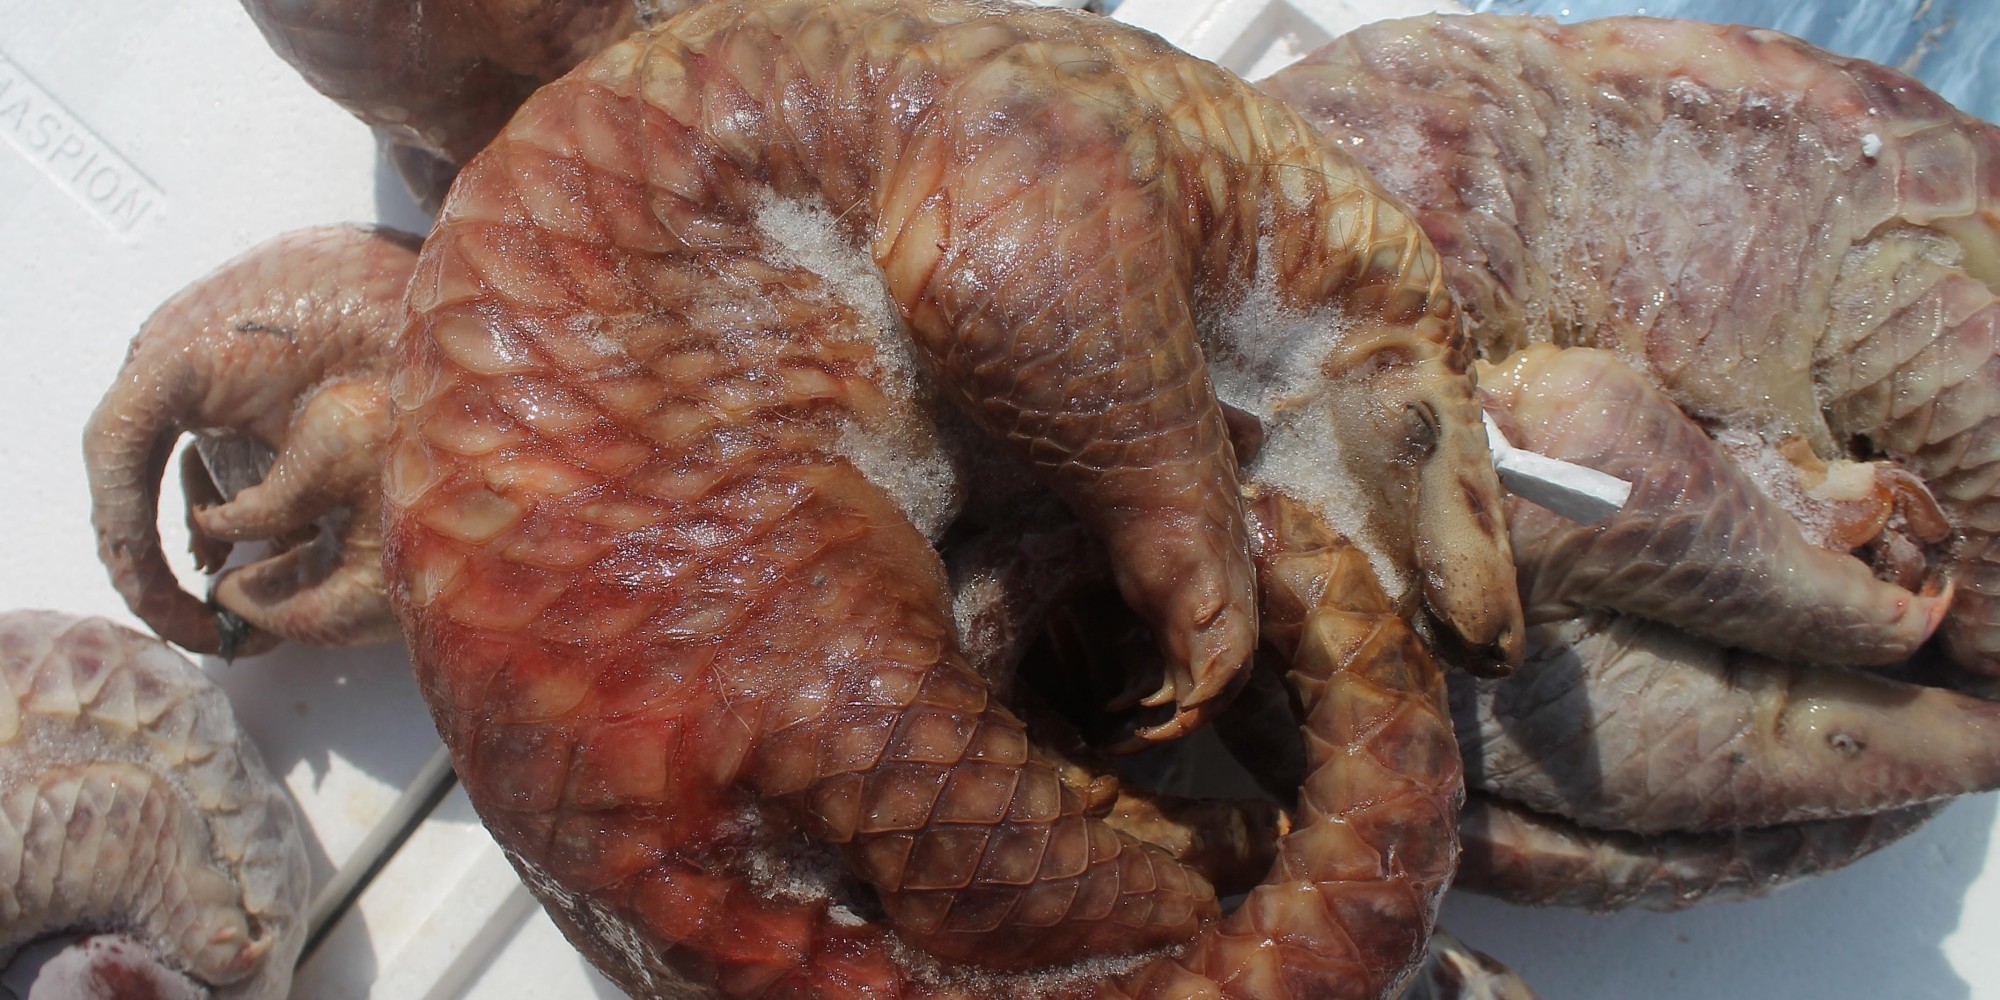 This Is How A Species Goes Extinct: More Than A Ton Of Frozen Pangolin Meat Seized In ...